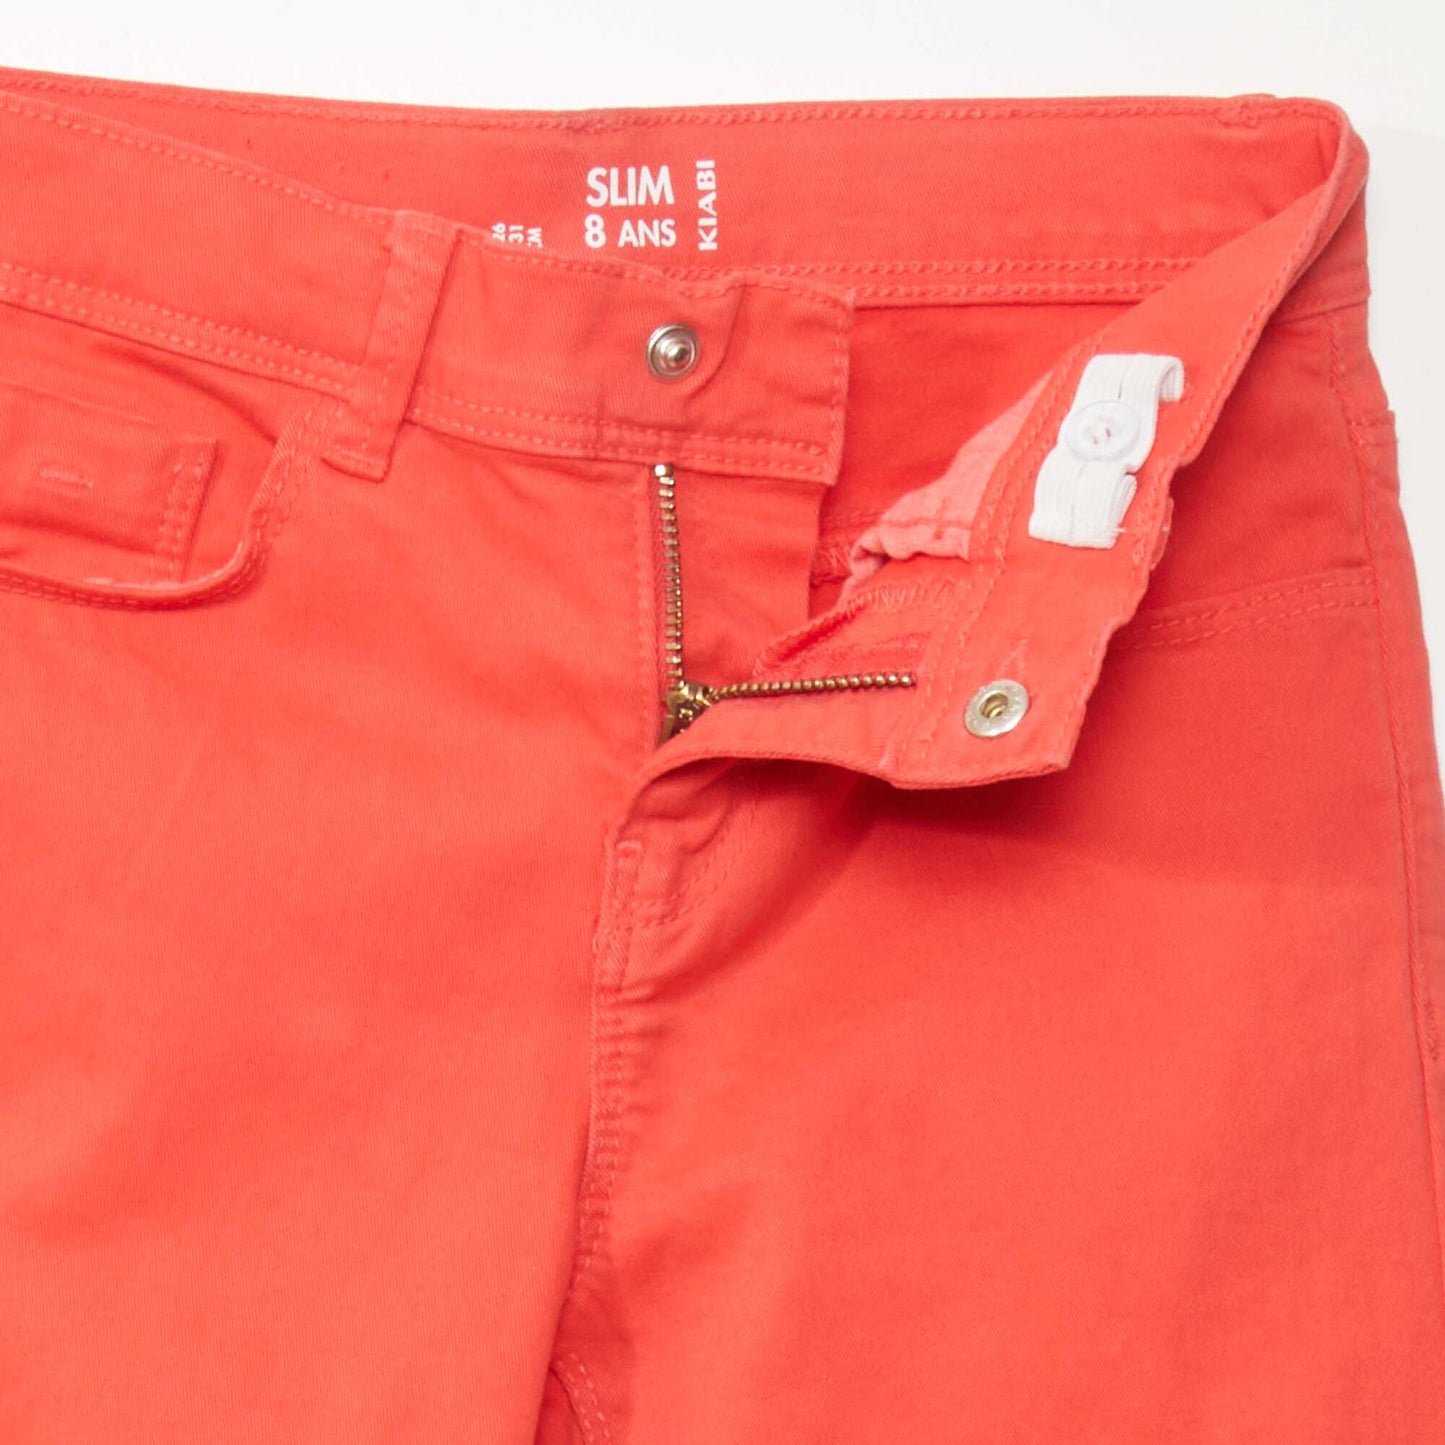 Slim-fit jeans red